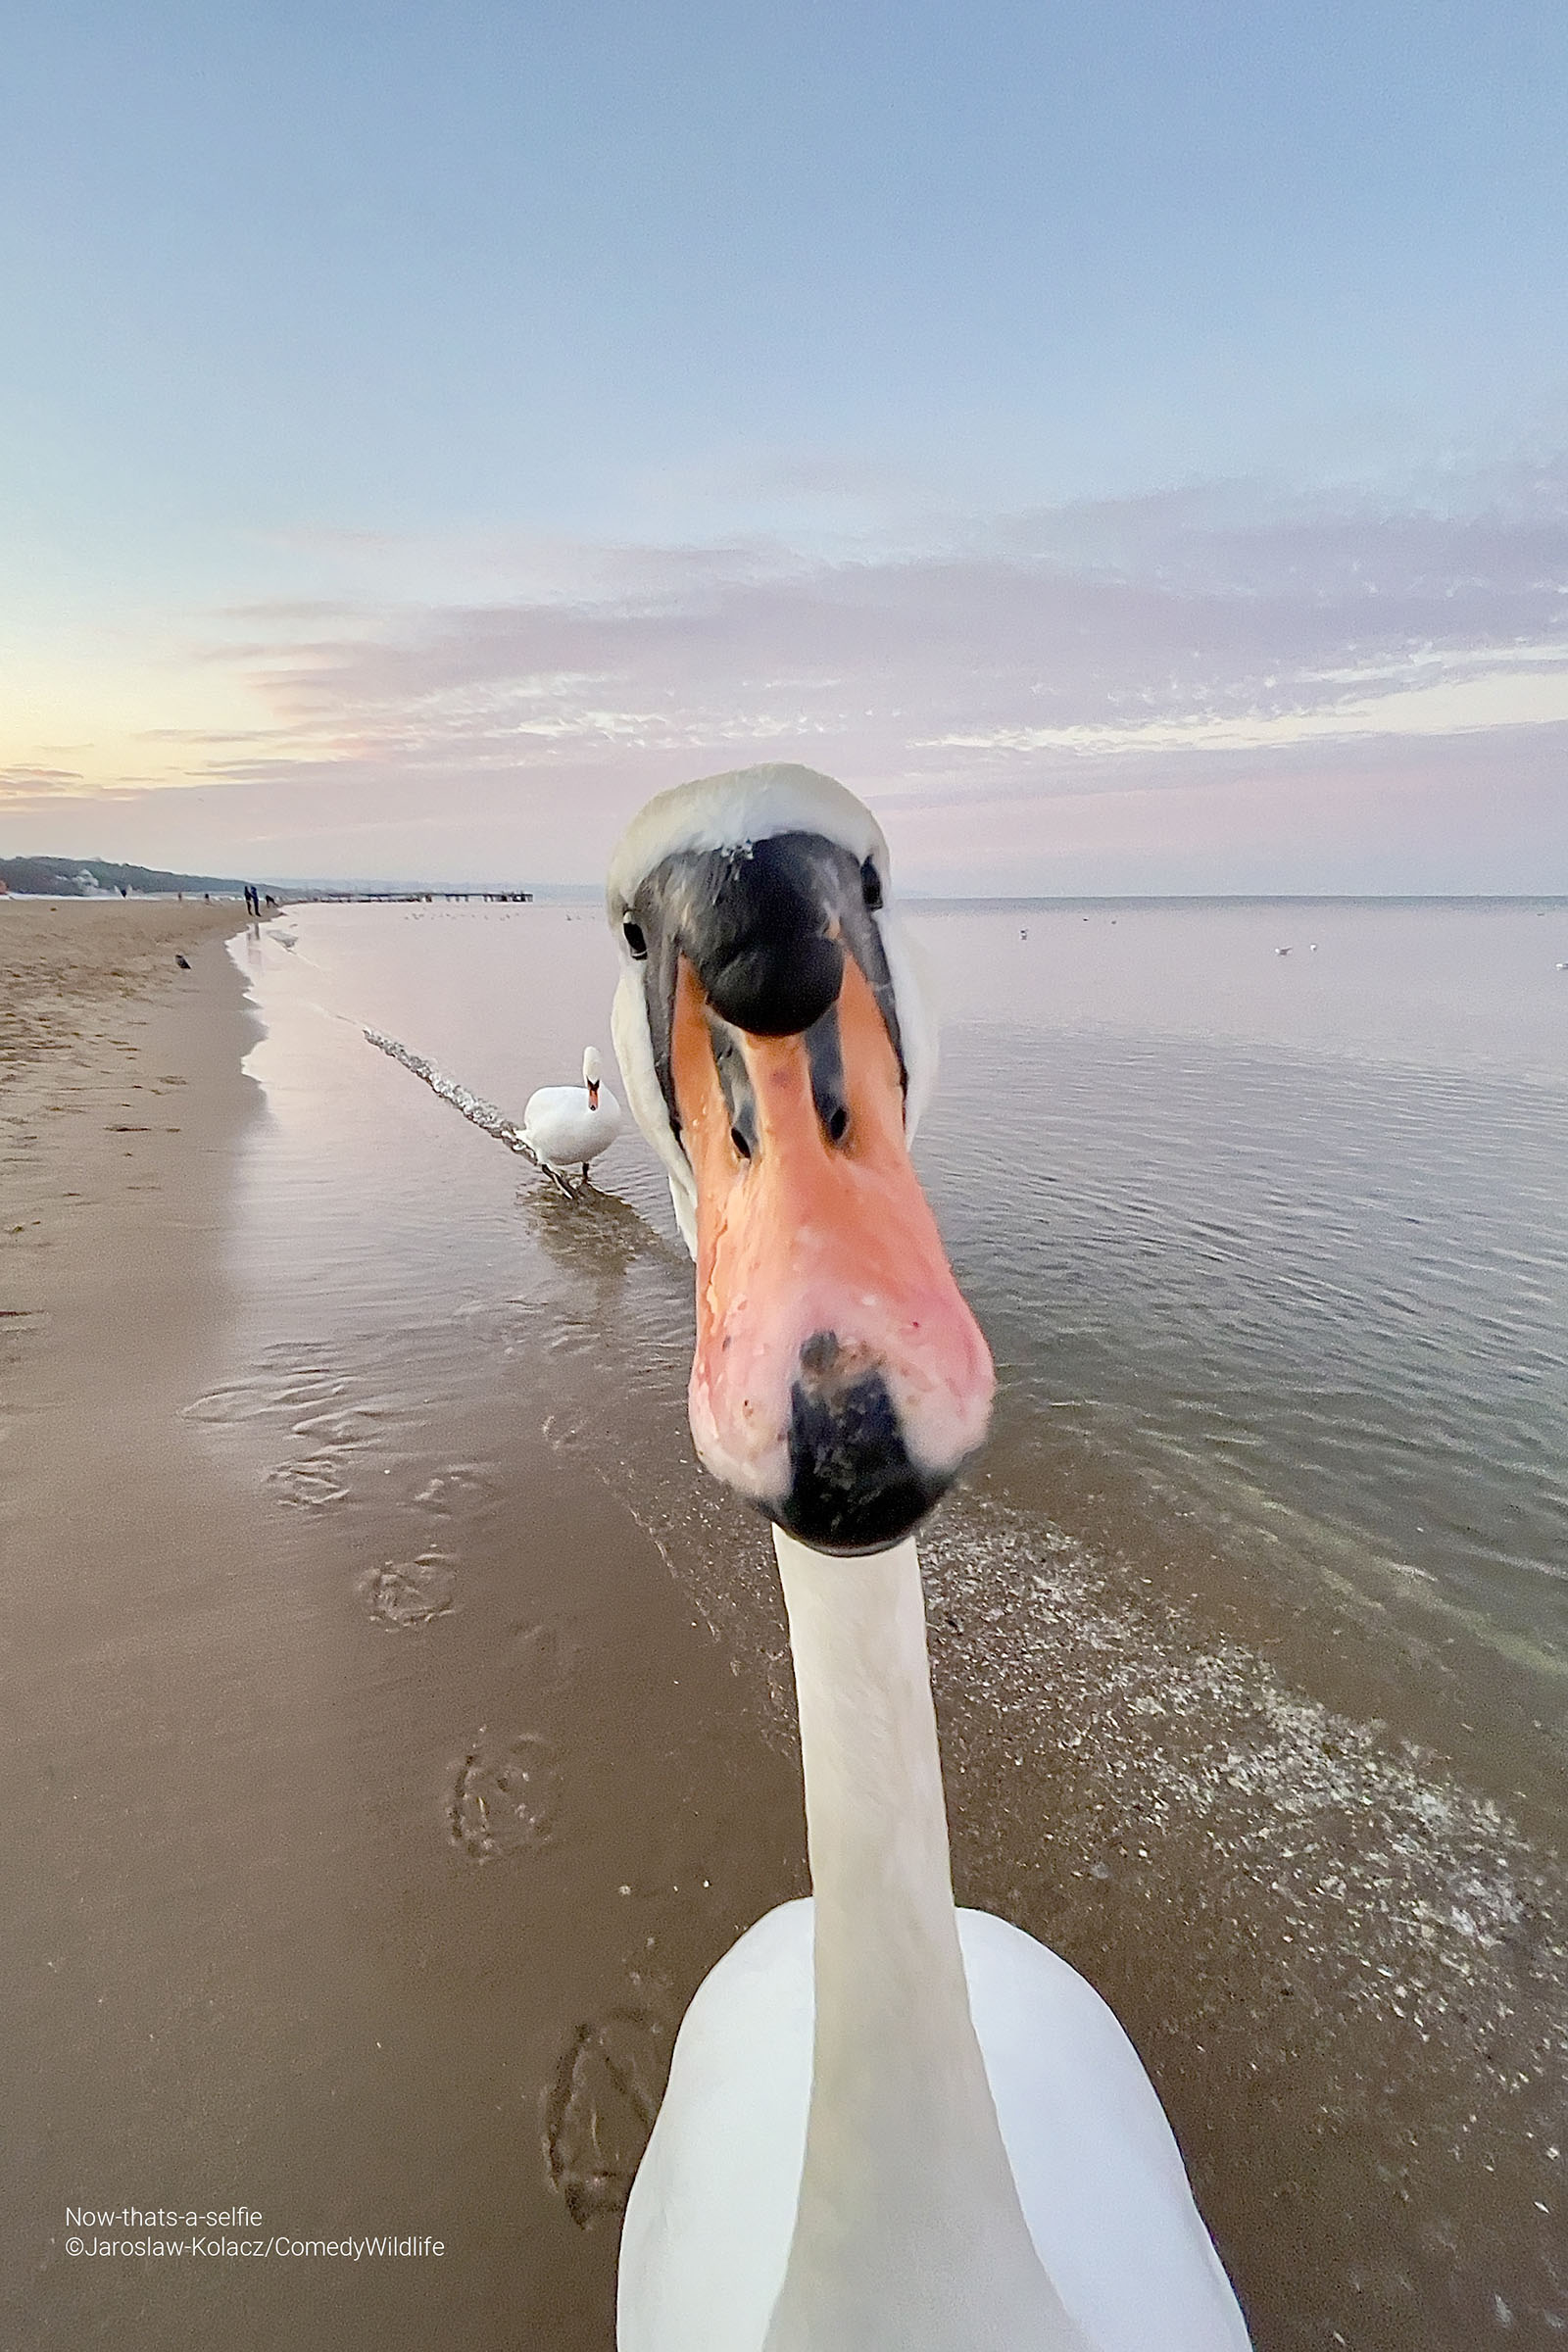 Swan on the beach gets up close to the camera.